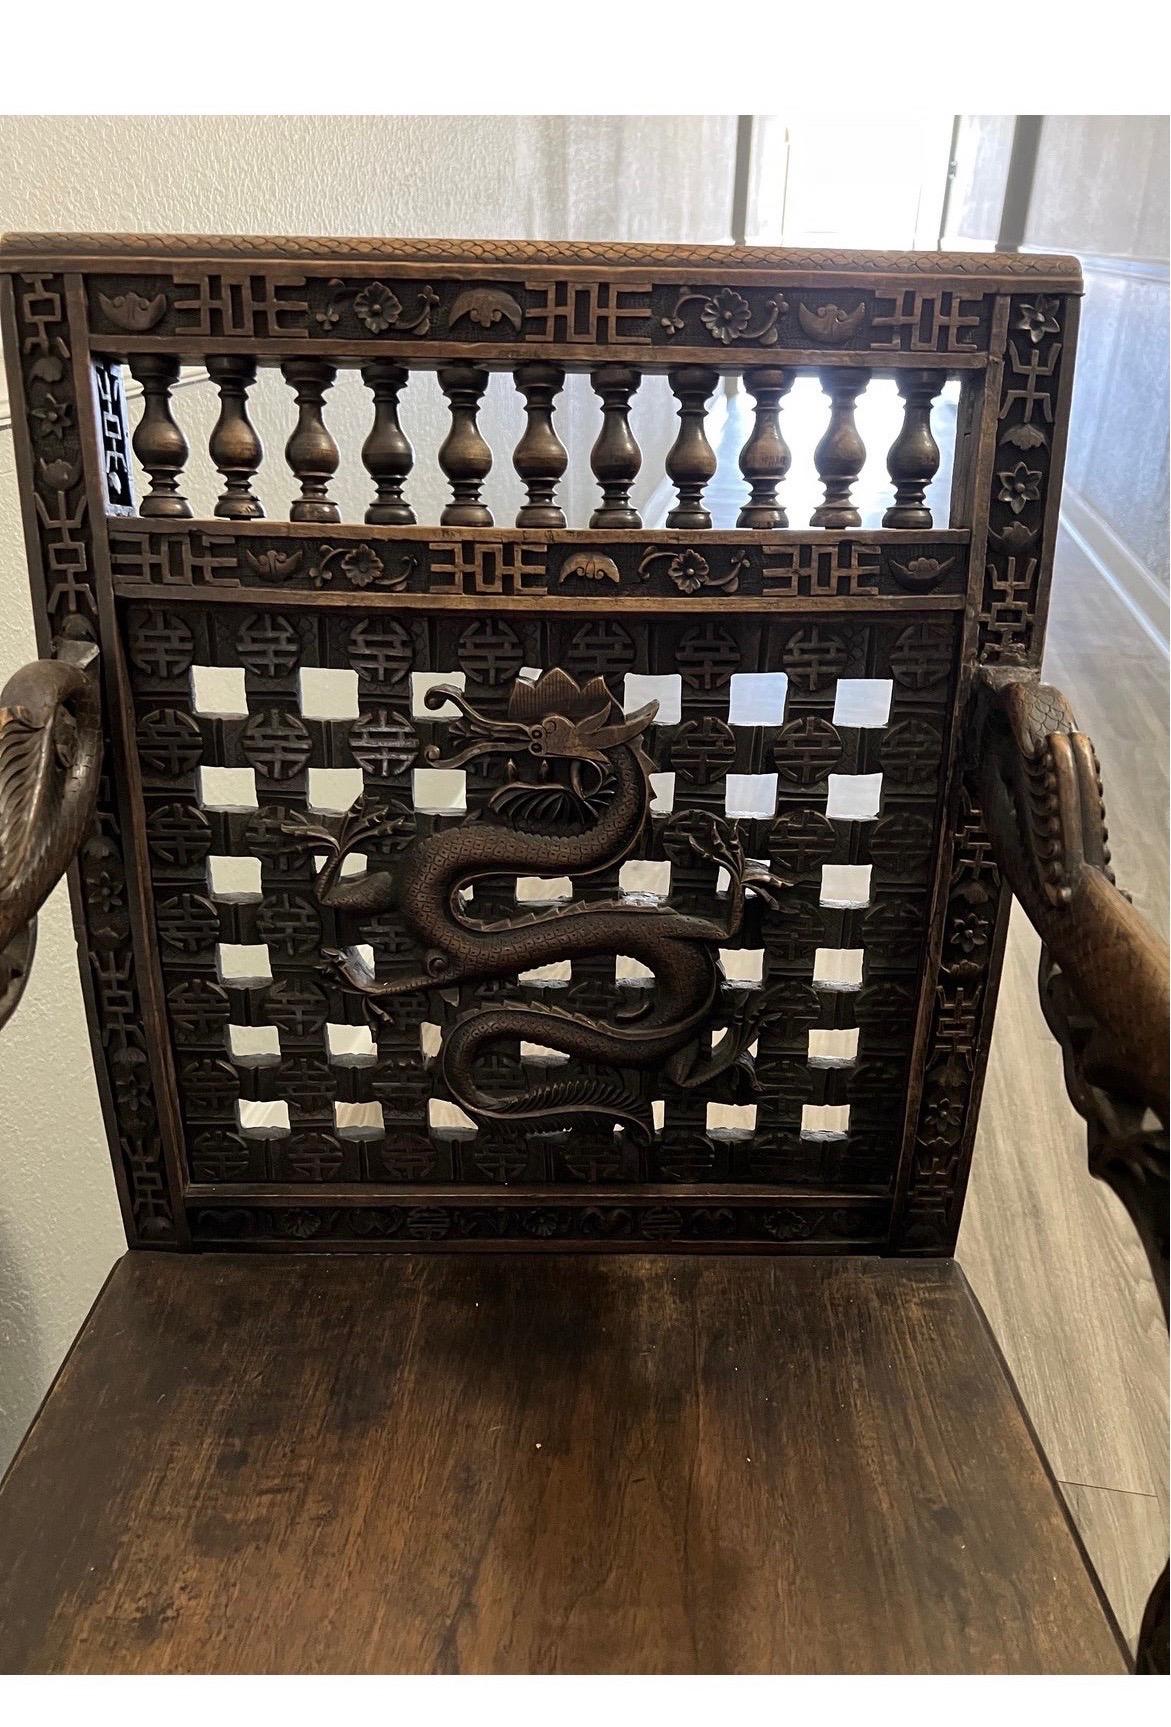 A pair of antique chinese armchairs with absolutely exceptional carvings. Dragons all over, chinese symbols of longevity and happiness, the back as ornate as the front - these chairs are like no other!